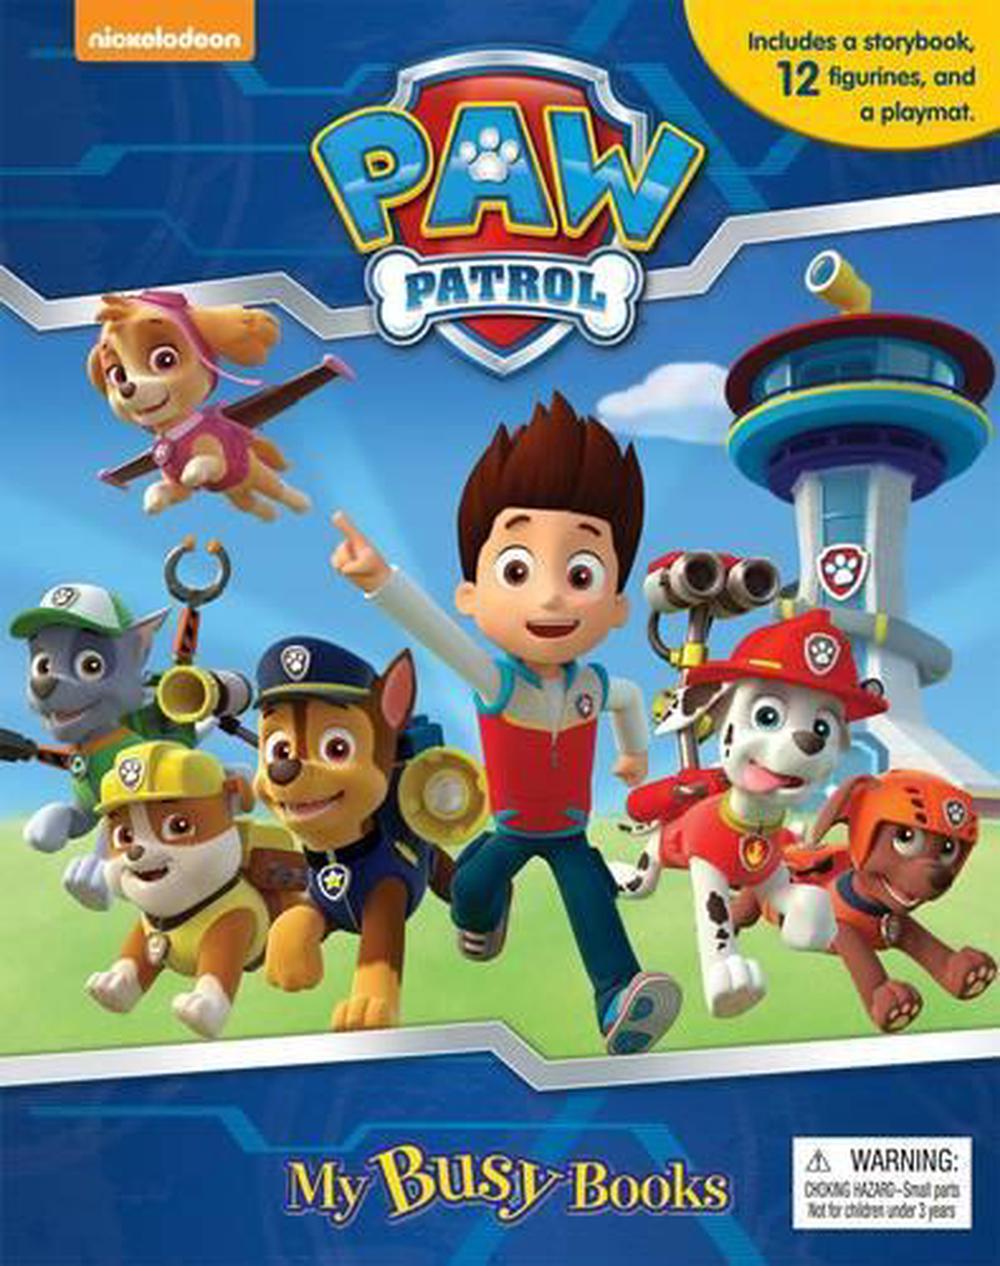 Paw Patrol My Busy Book, 9782764330890 | Buy online at The Nile